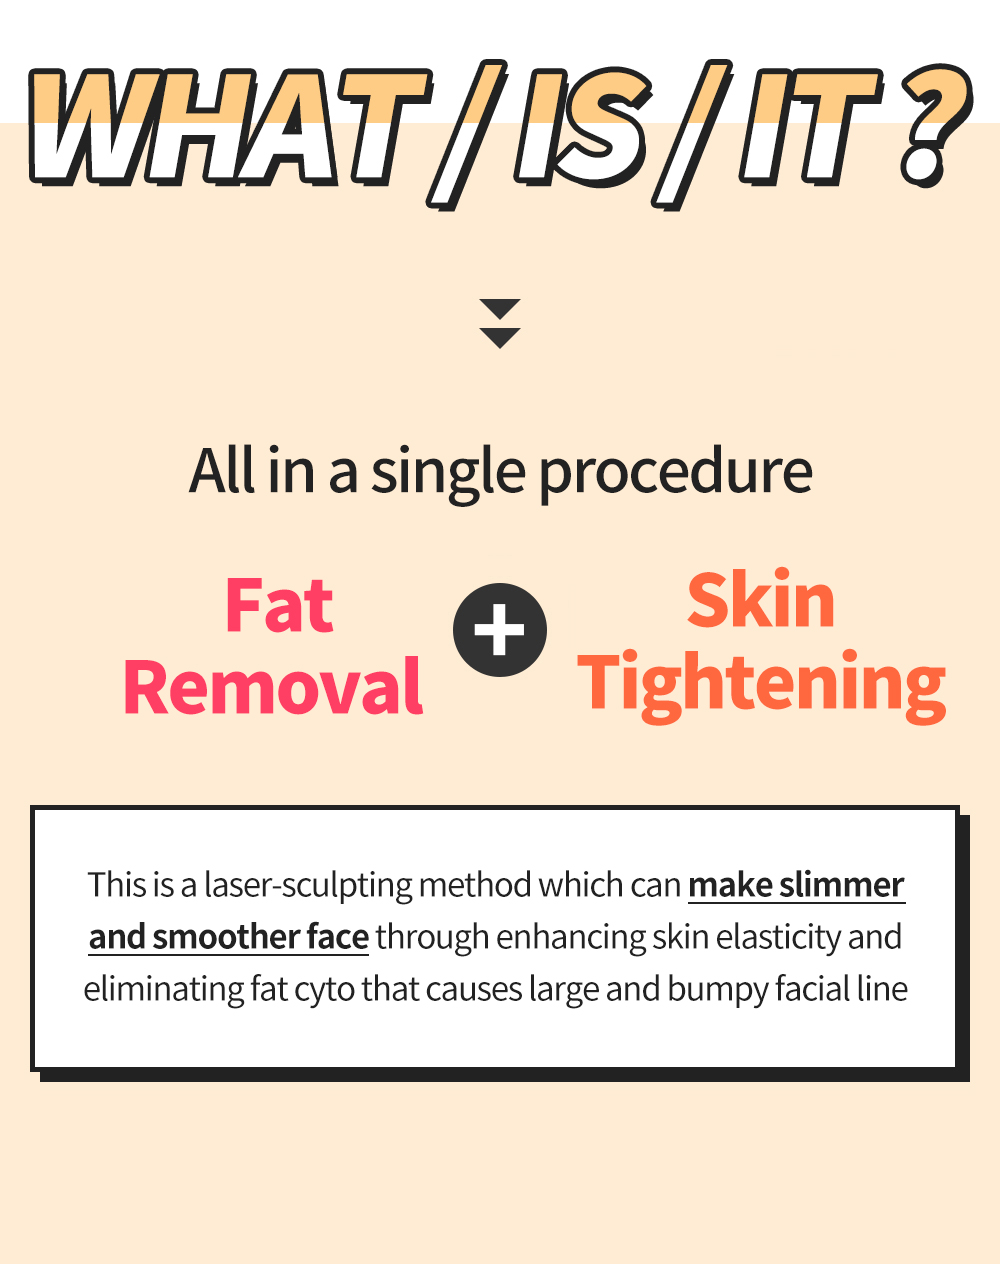 WHAT / IS / IT ? > All in a single procedure Fat Removal + Skin Tightening - This is a laser-sculpting method which can make slimmer and smoother face through enhancing skin elasticity and eliminating fat cyto that causes large and bumpy facial line